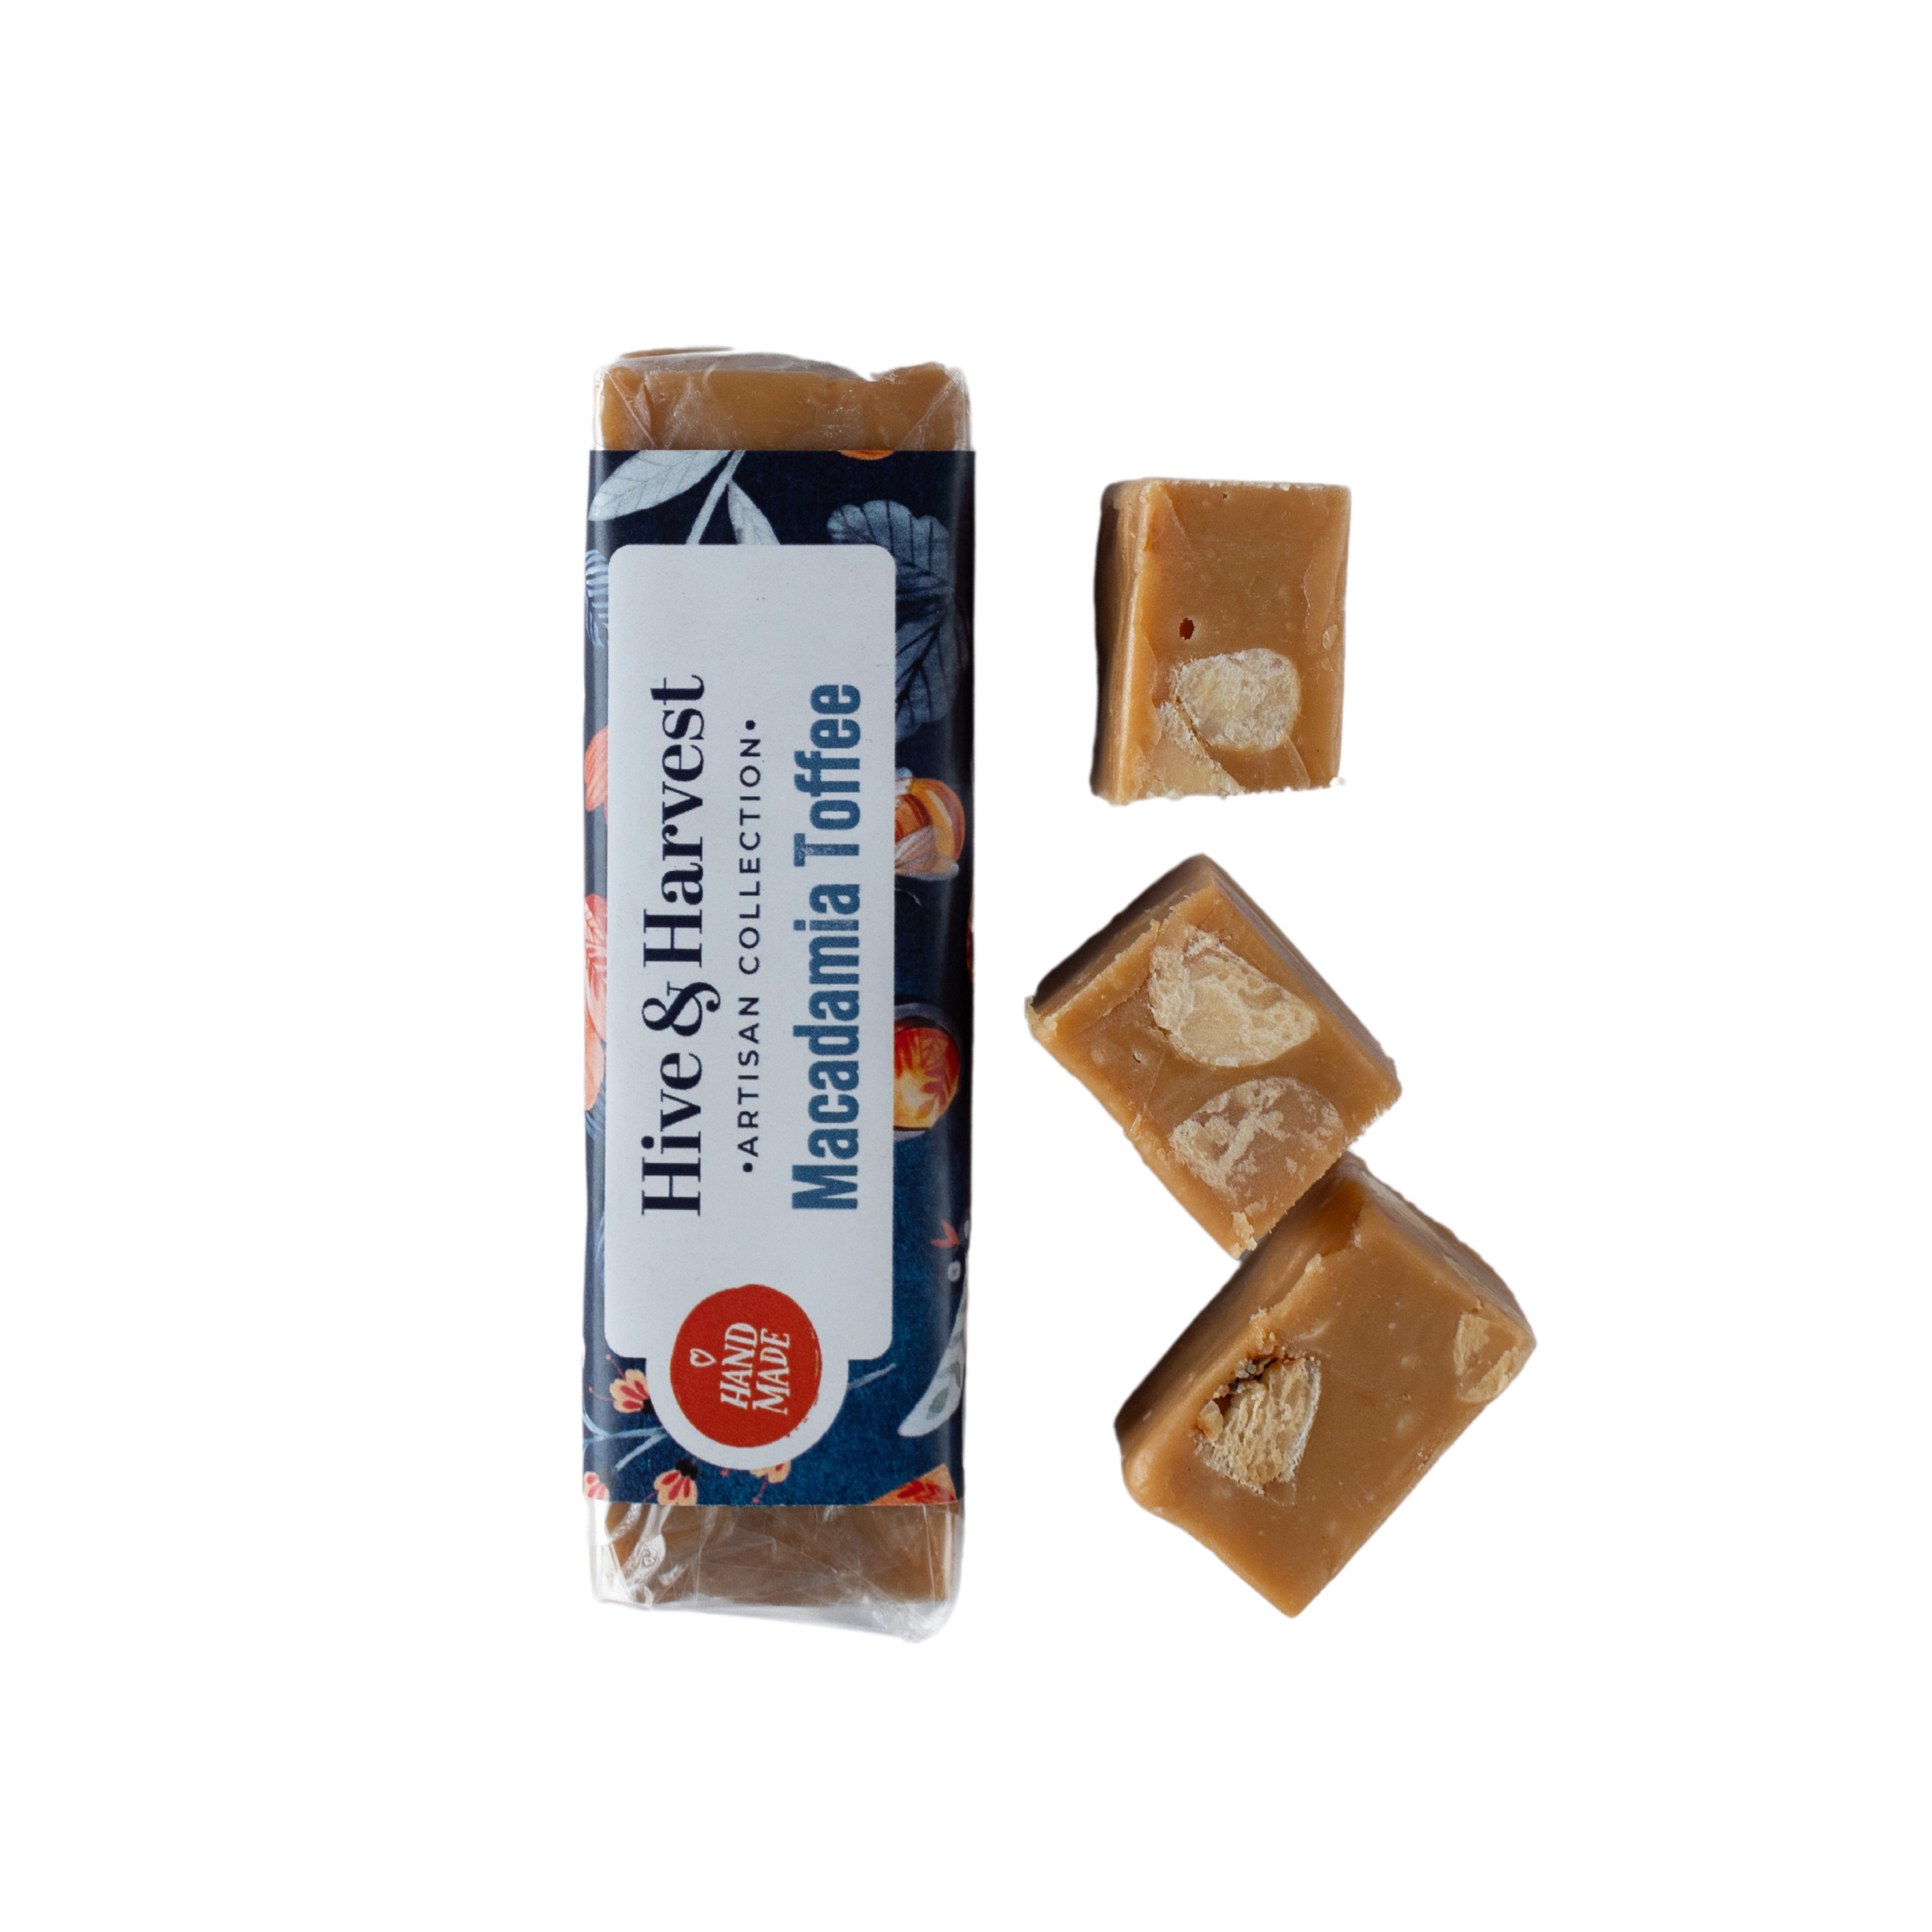 Handed Crafted Macadamia Toffee Bar